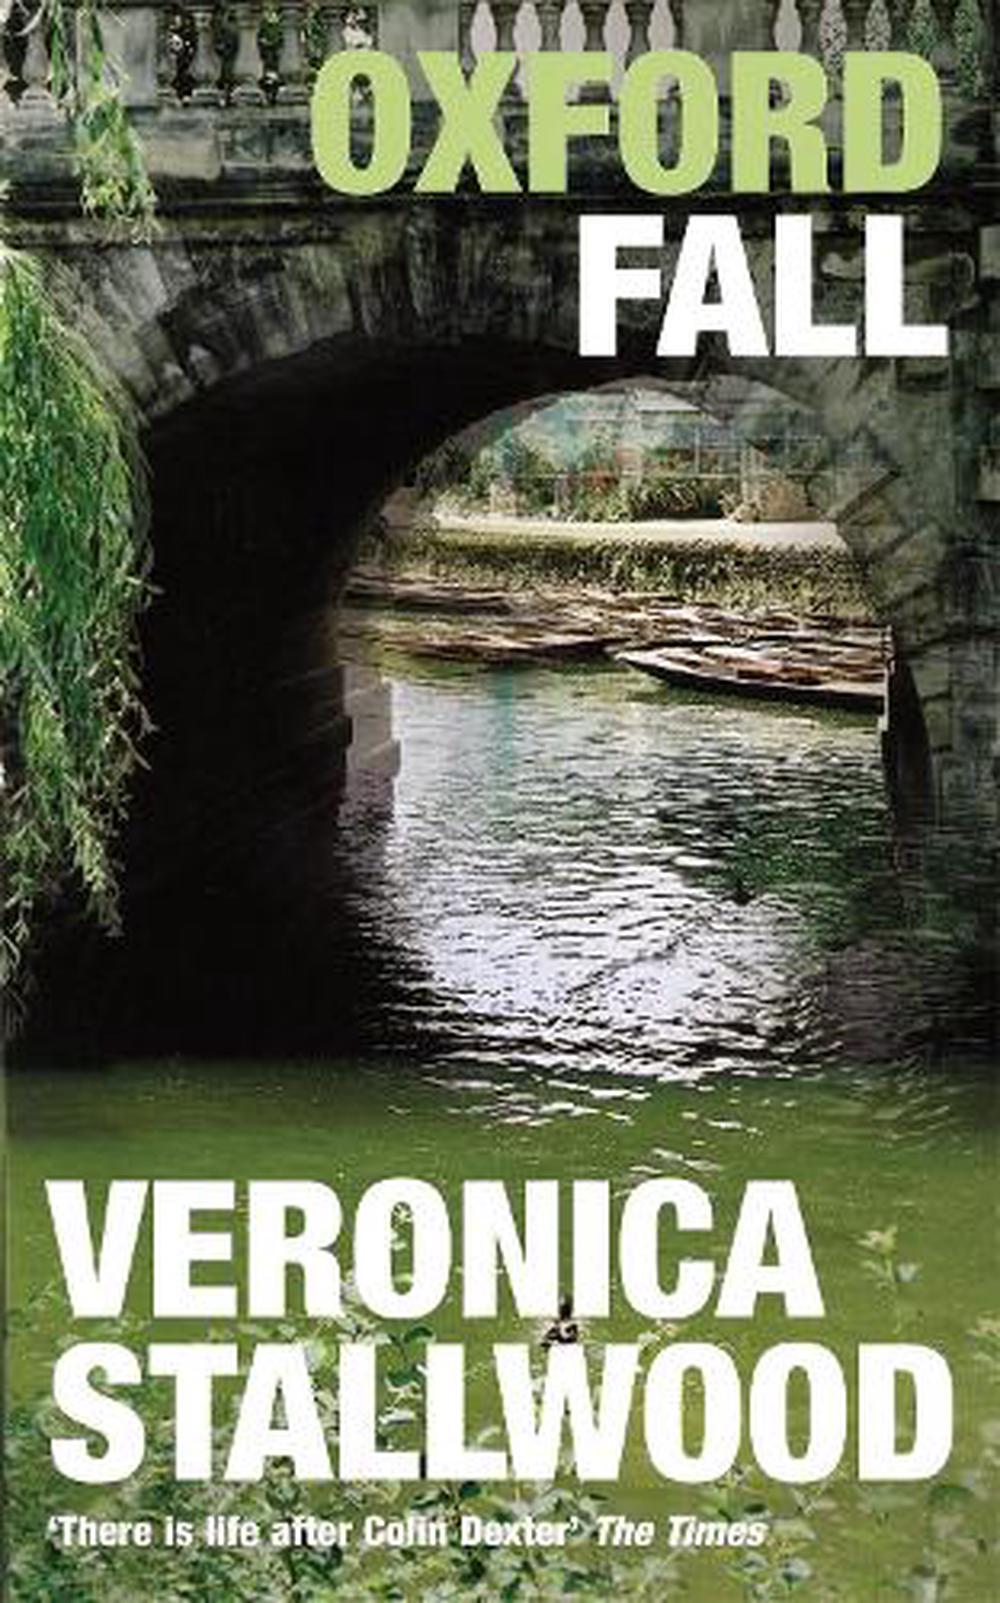 Oxford Fall by Veronica Stallwood (English) Paperback Book Free